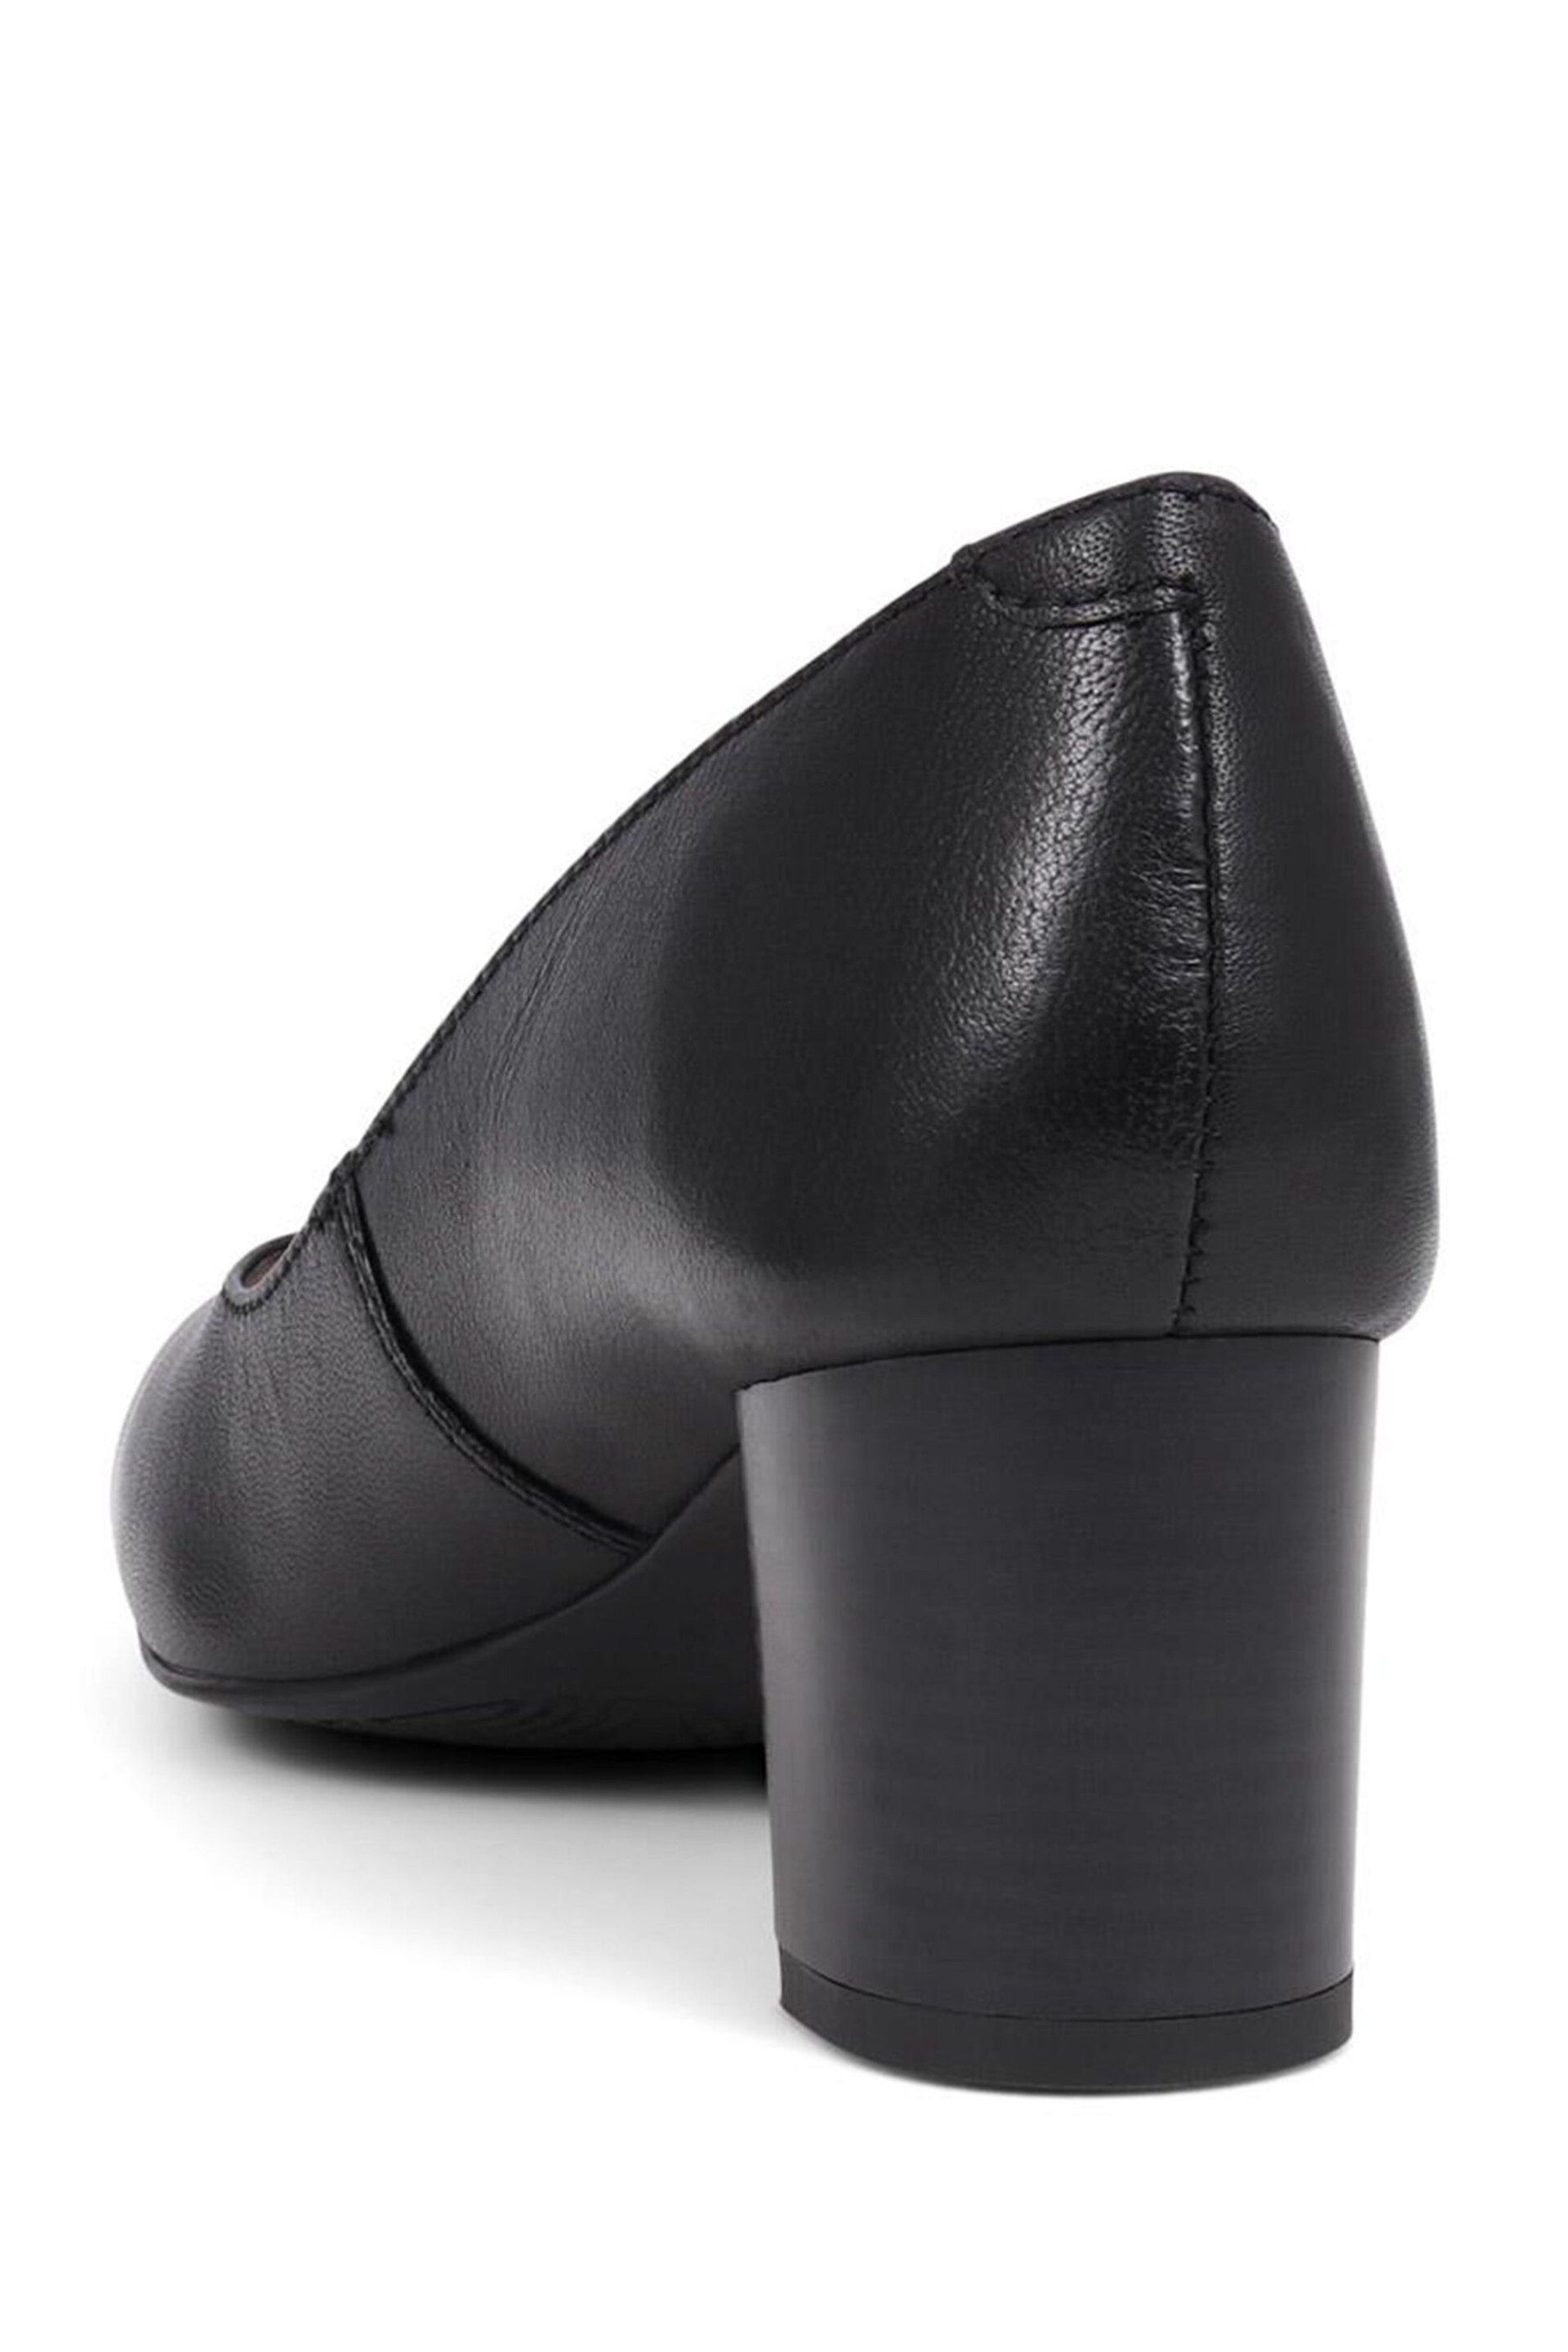 Pavers Black Pavers Heeled Leather Court Shoes - Image 2 of 5